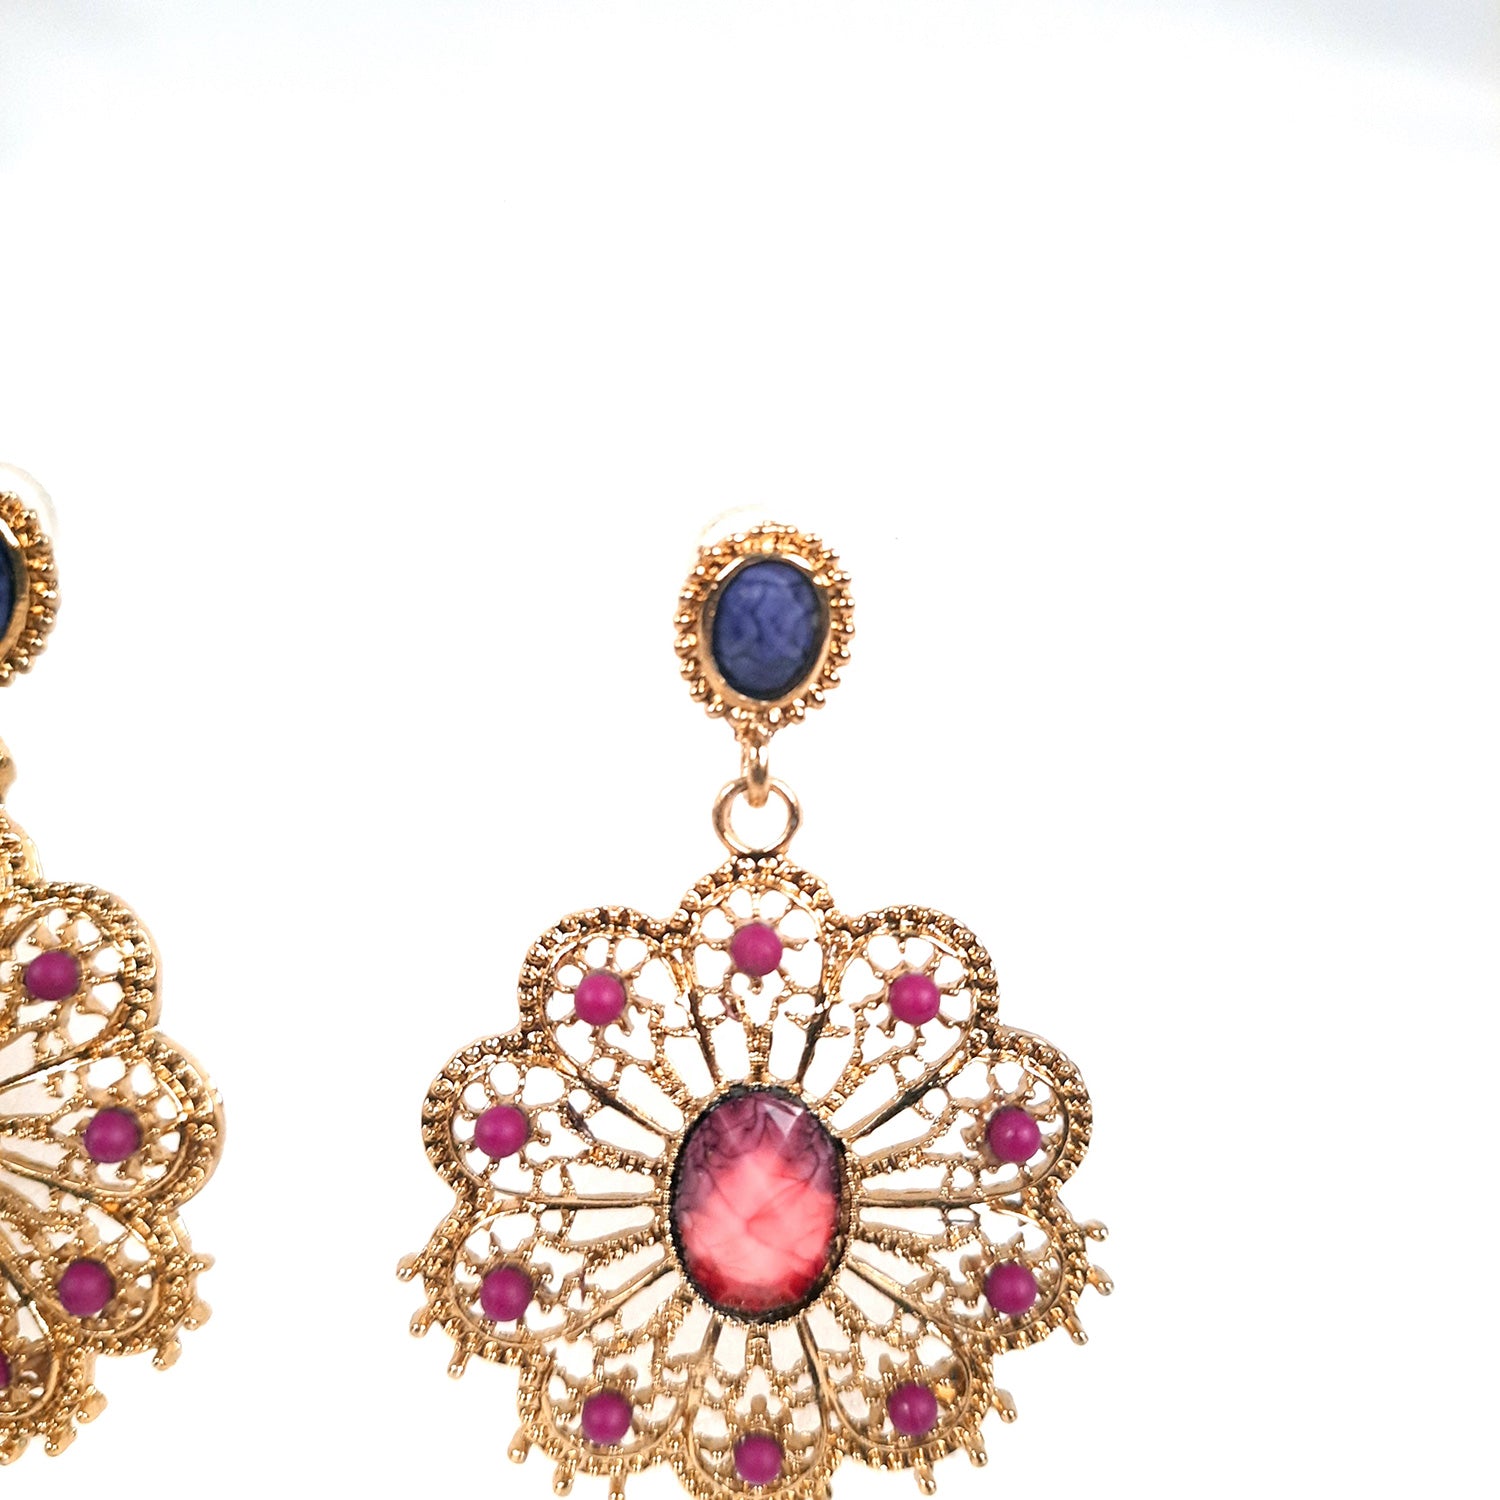 Earrings Danglers - for Girls and Women | Latest Stylish Fashion Jewellery | Gifts for Her, Friendship Day, Valentine's Day Gift - Apkamart